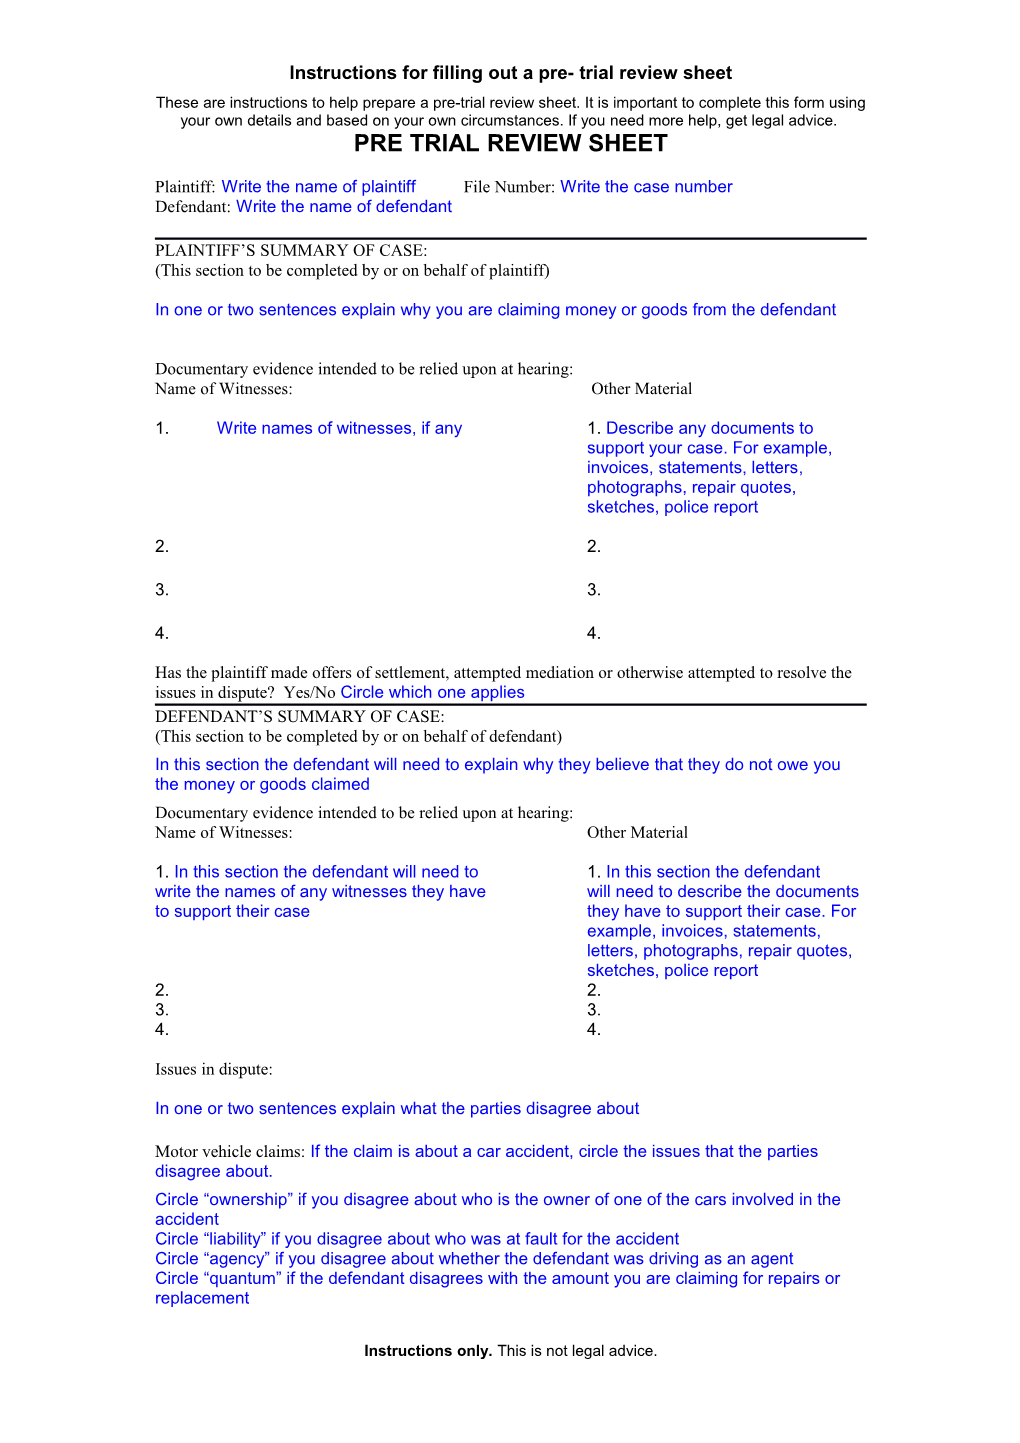 Instructions Pre-Trial Review Sheet